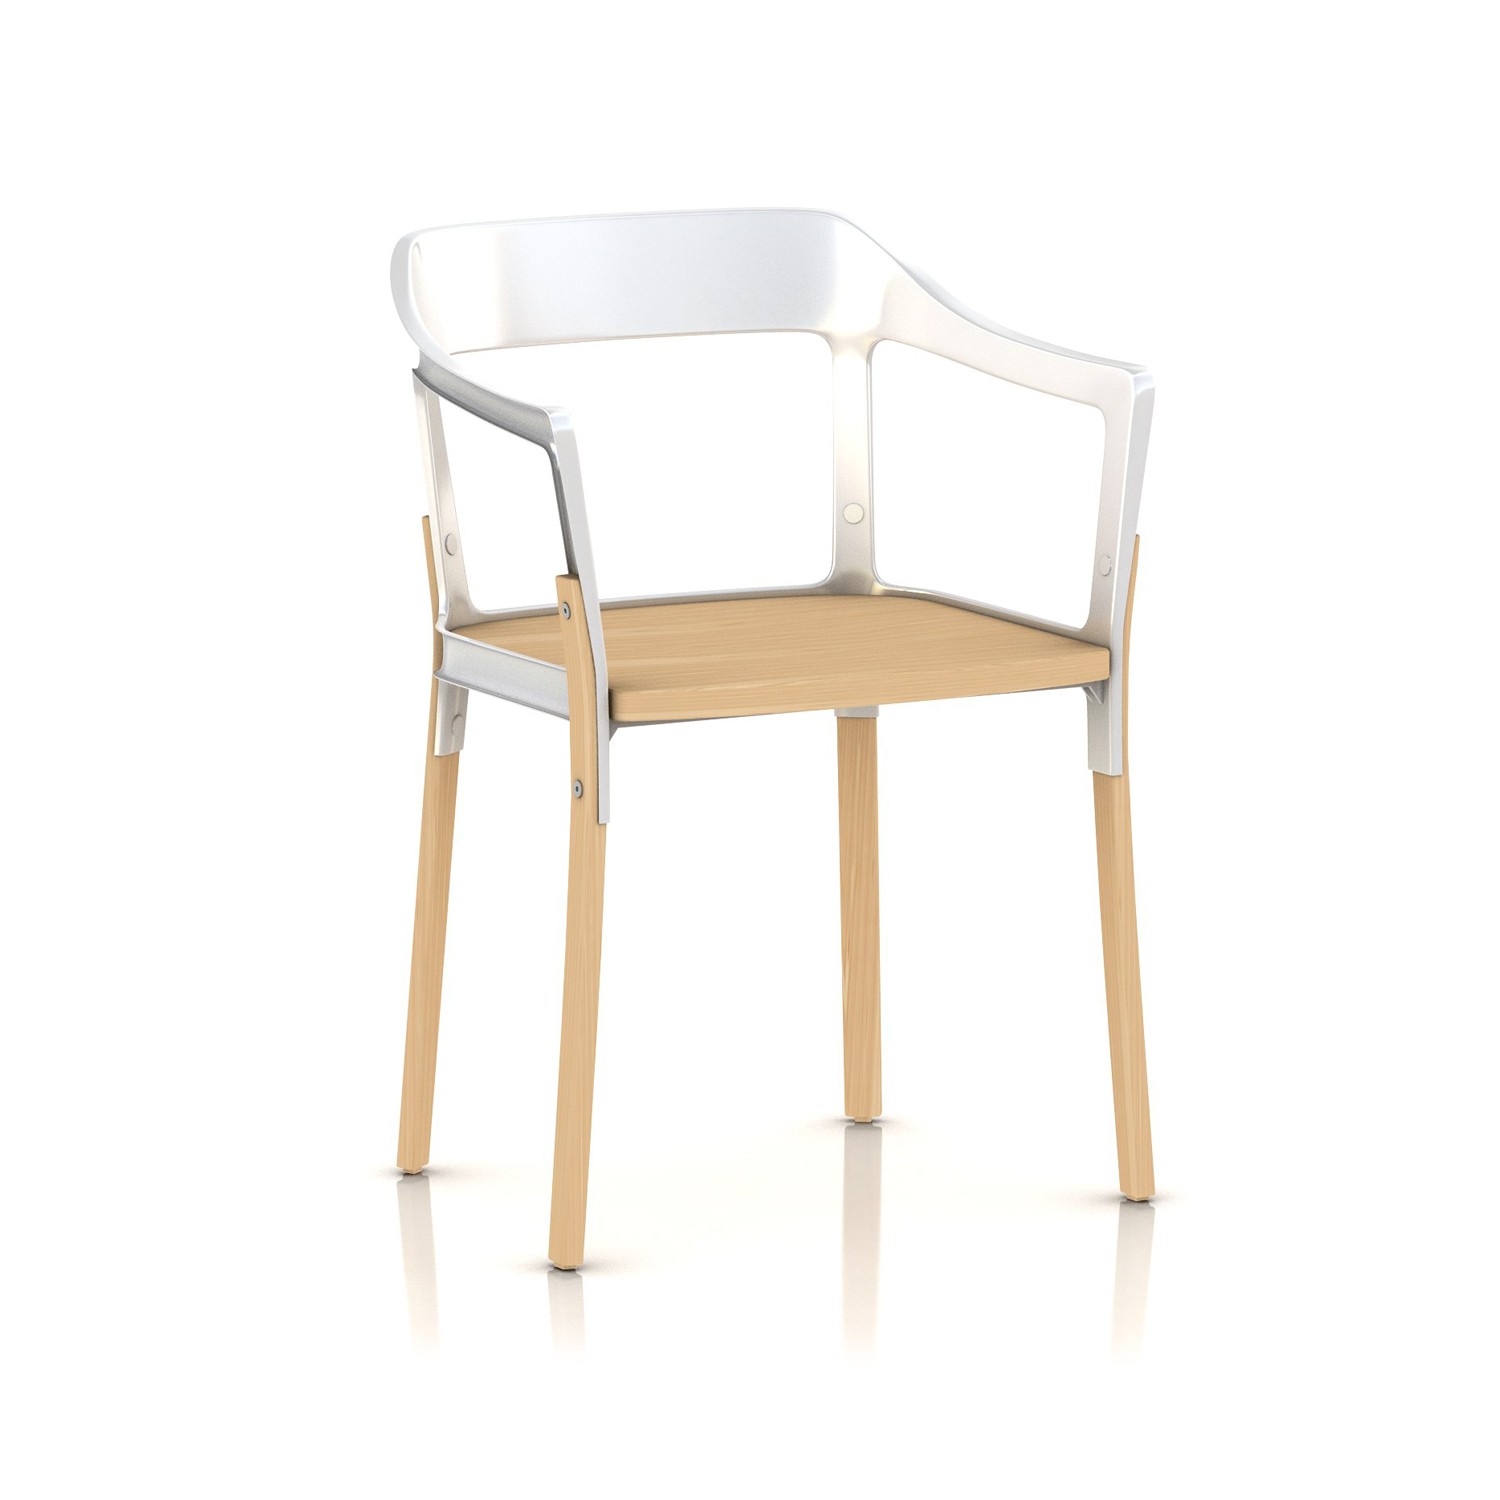 STEELWOOD chair in natural wood and metal painted white